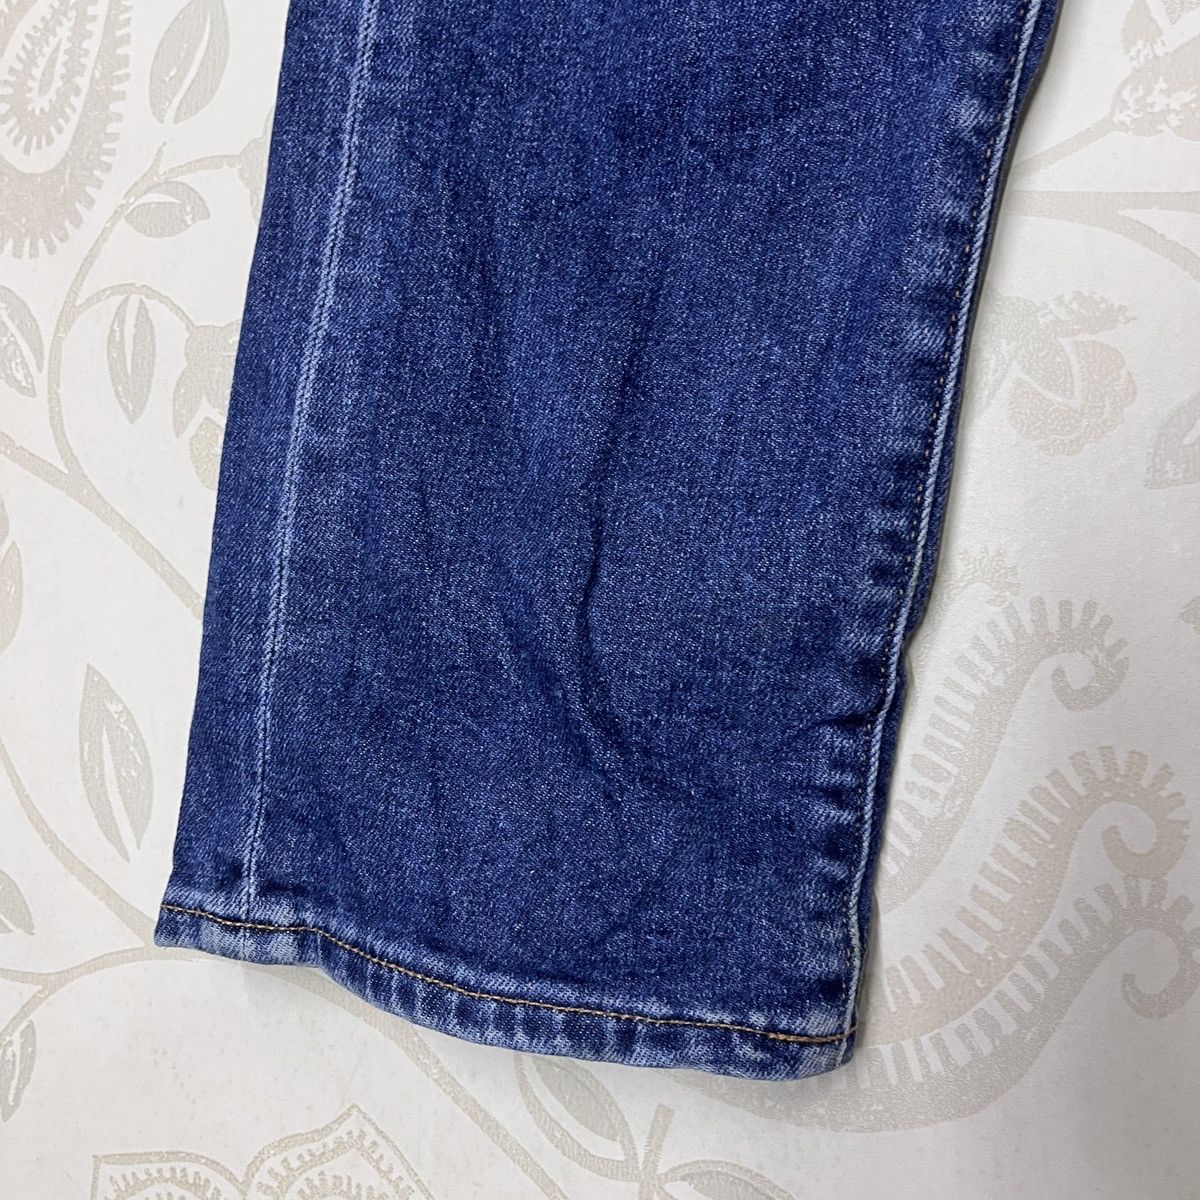 Levis Made & Crafted Blue Label Distressed Denim Jeans - 18